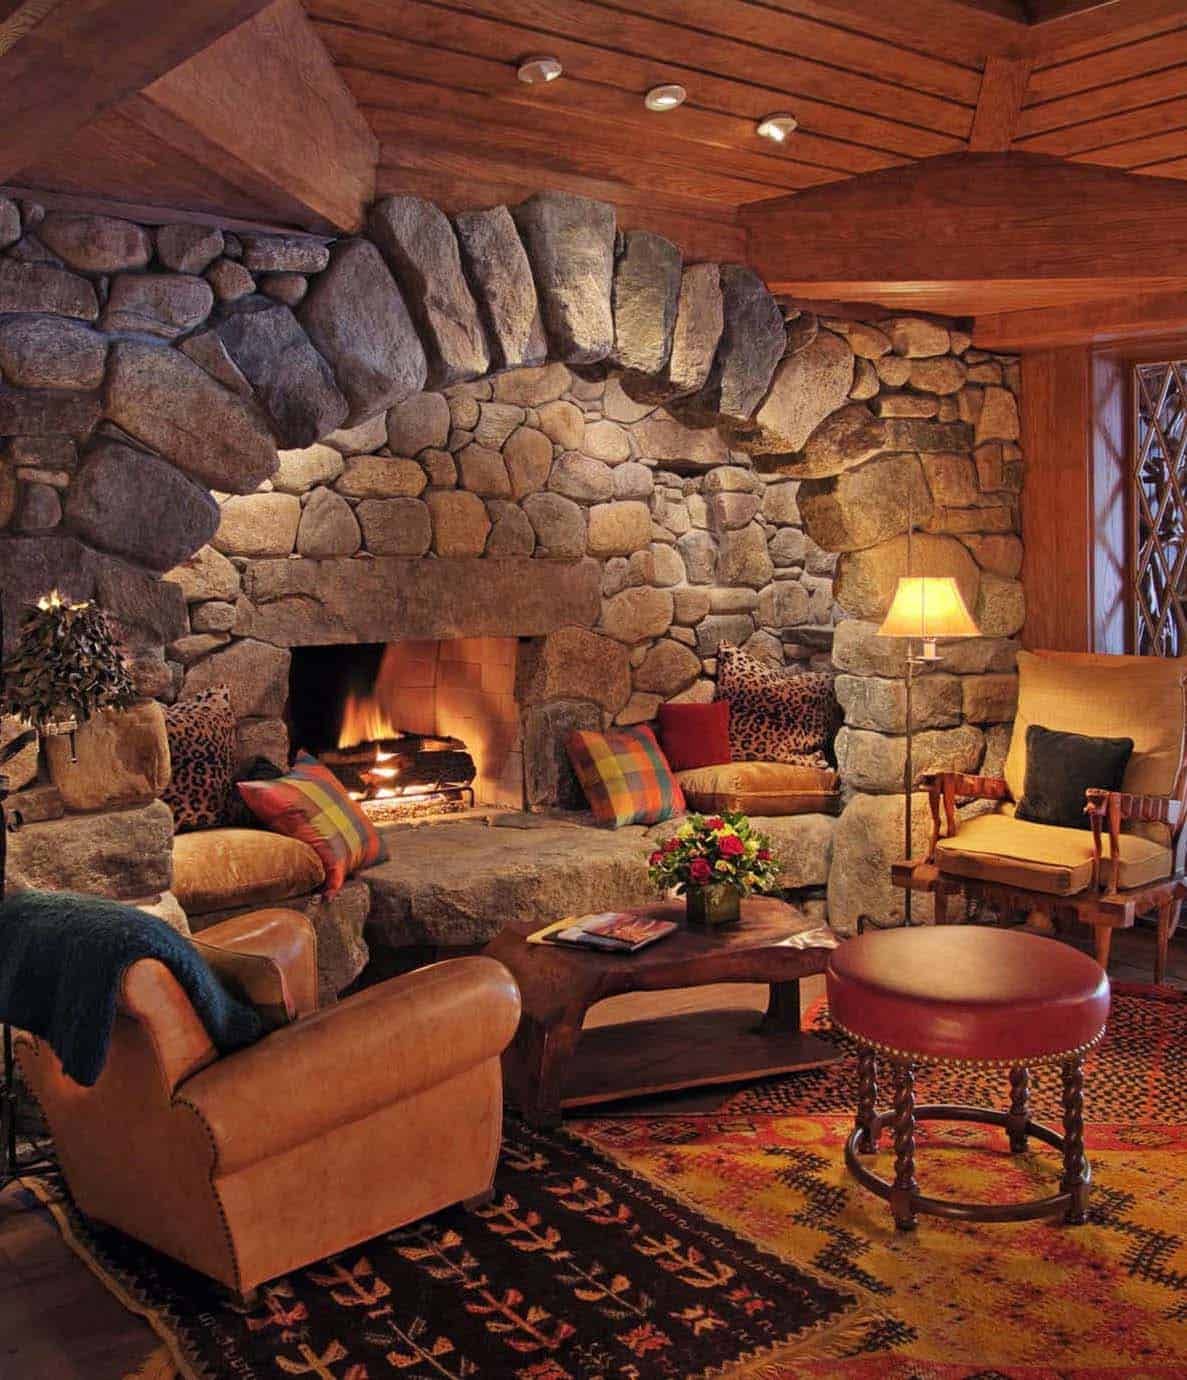 Cozy Fireplace Images Luxury 28 Extremely Cozy Fireplace Reading Nooks for Curling Up In